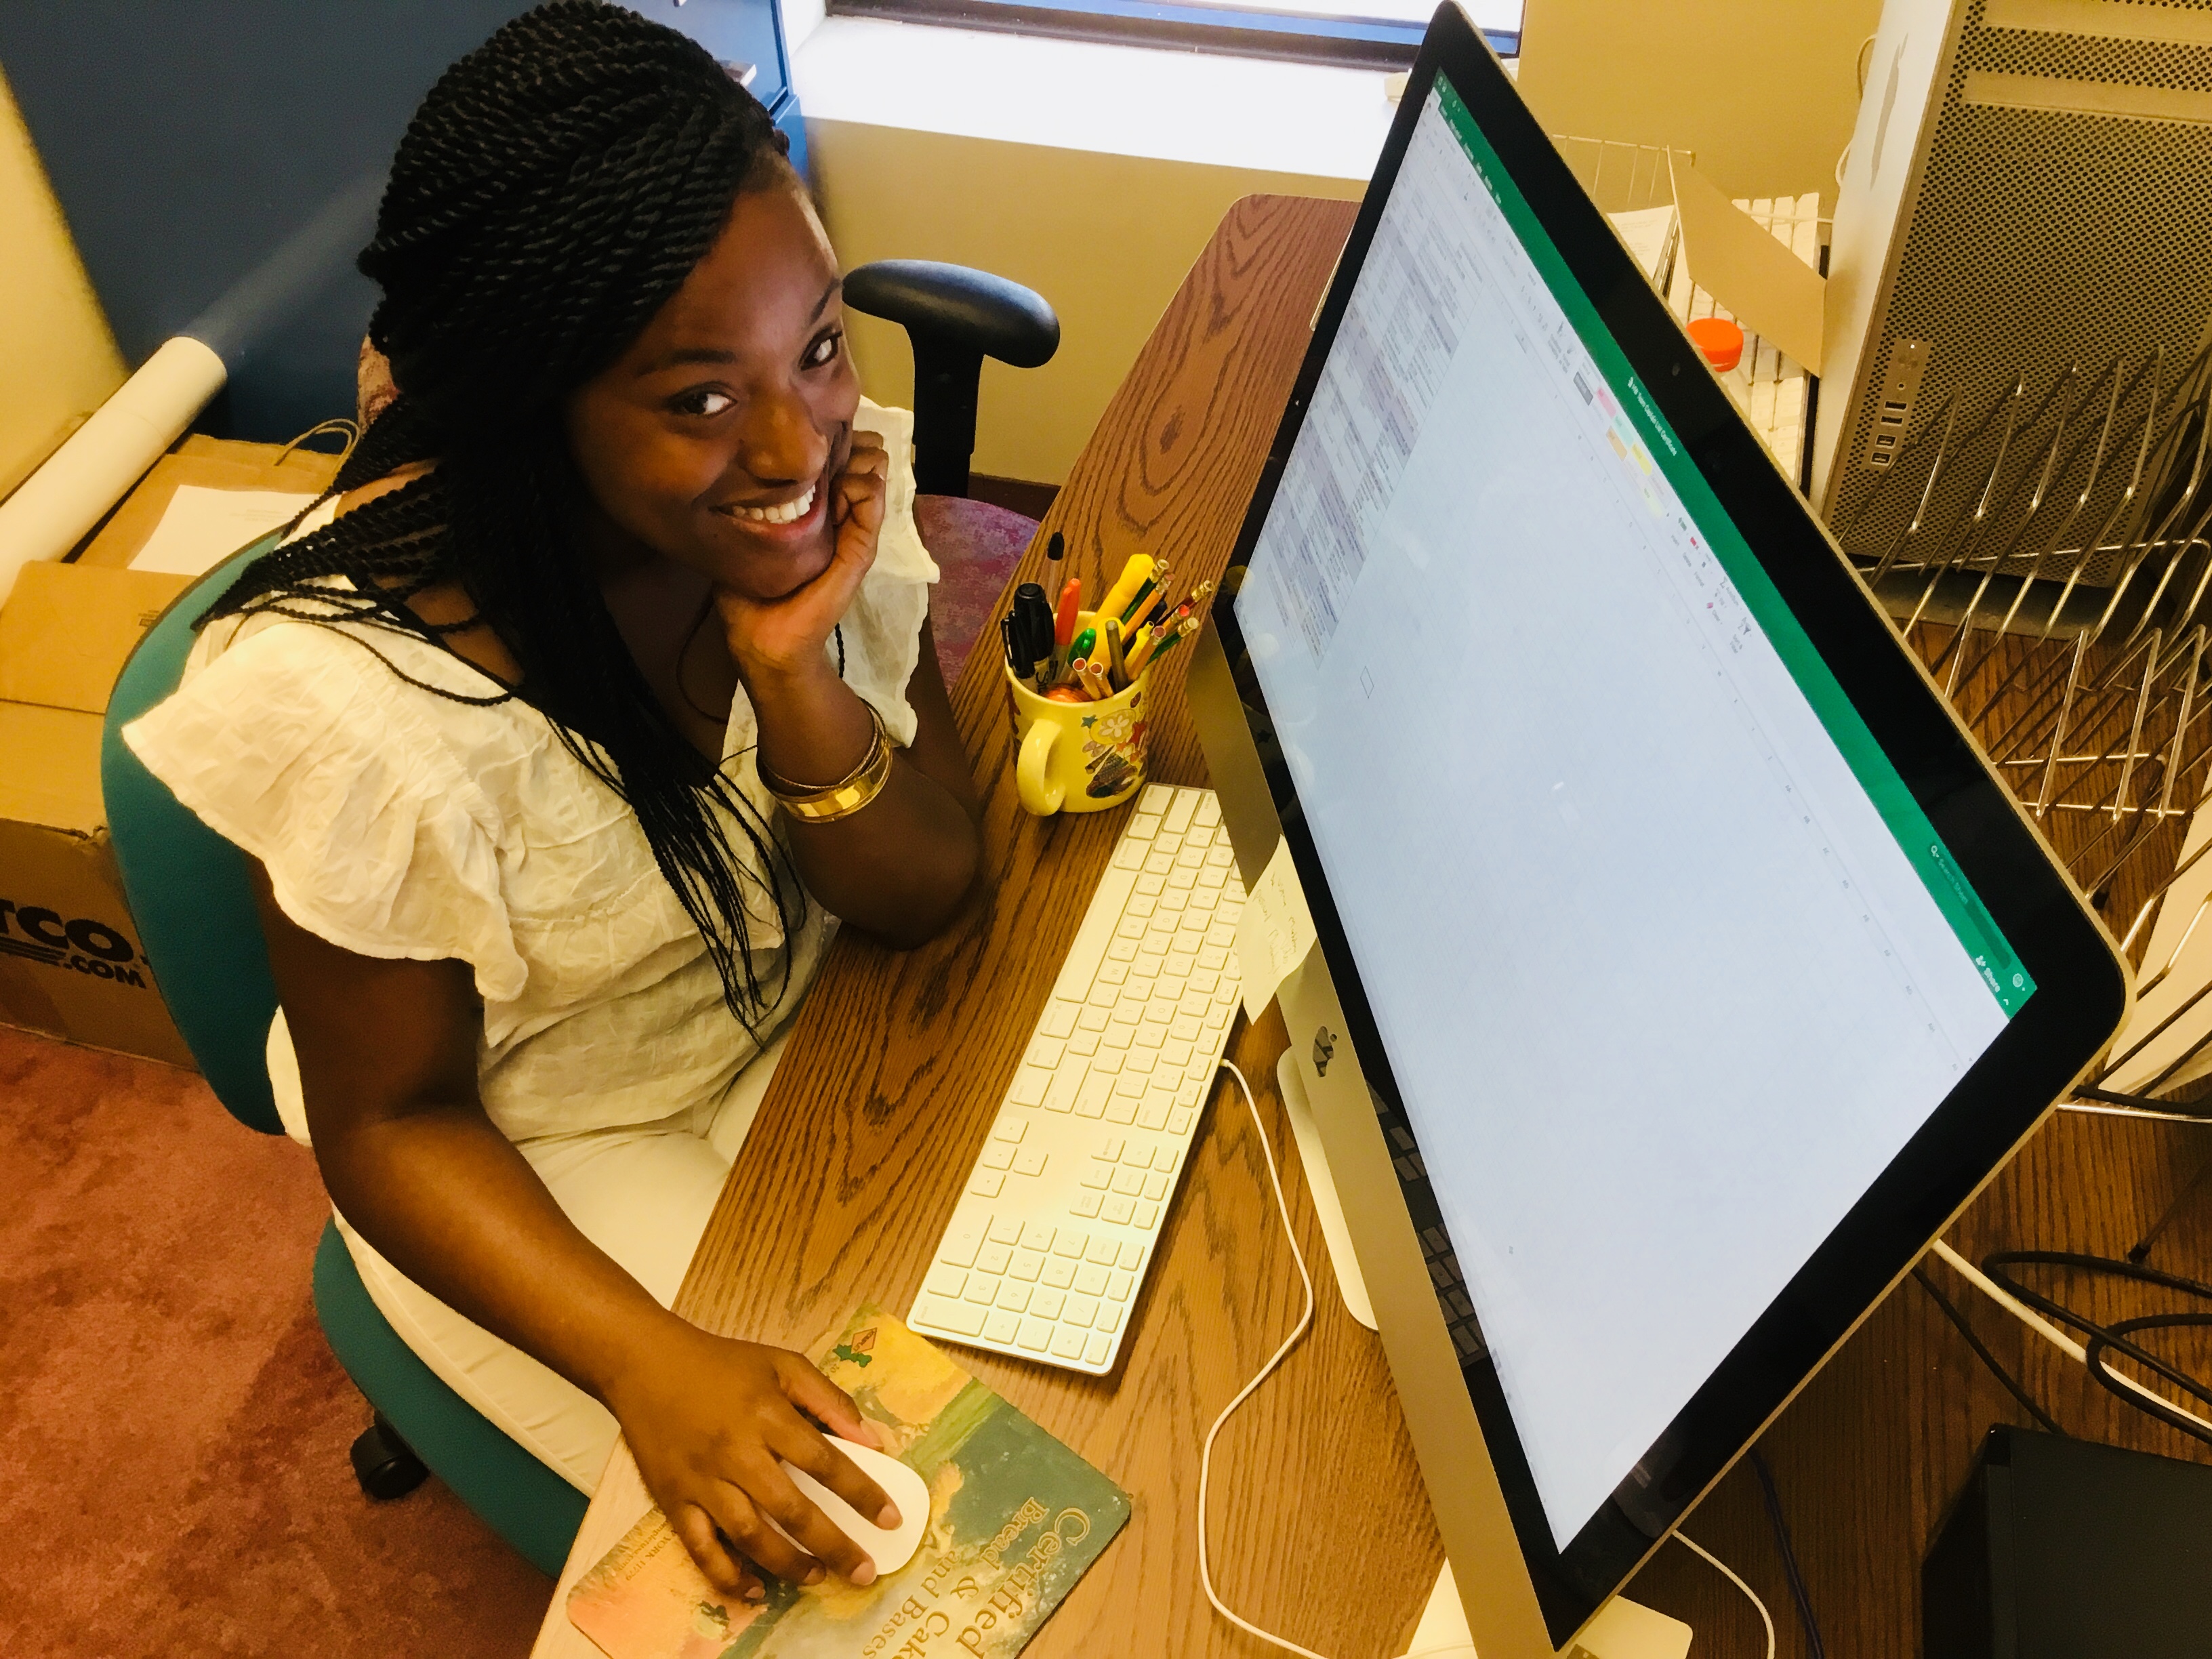 Amani Mike, a student at SUNY College at Brockport, has a summer internship at Upstate Medical University, thanks to a partnership with Synergy. (Photo by Susan Keeter)